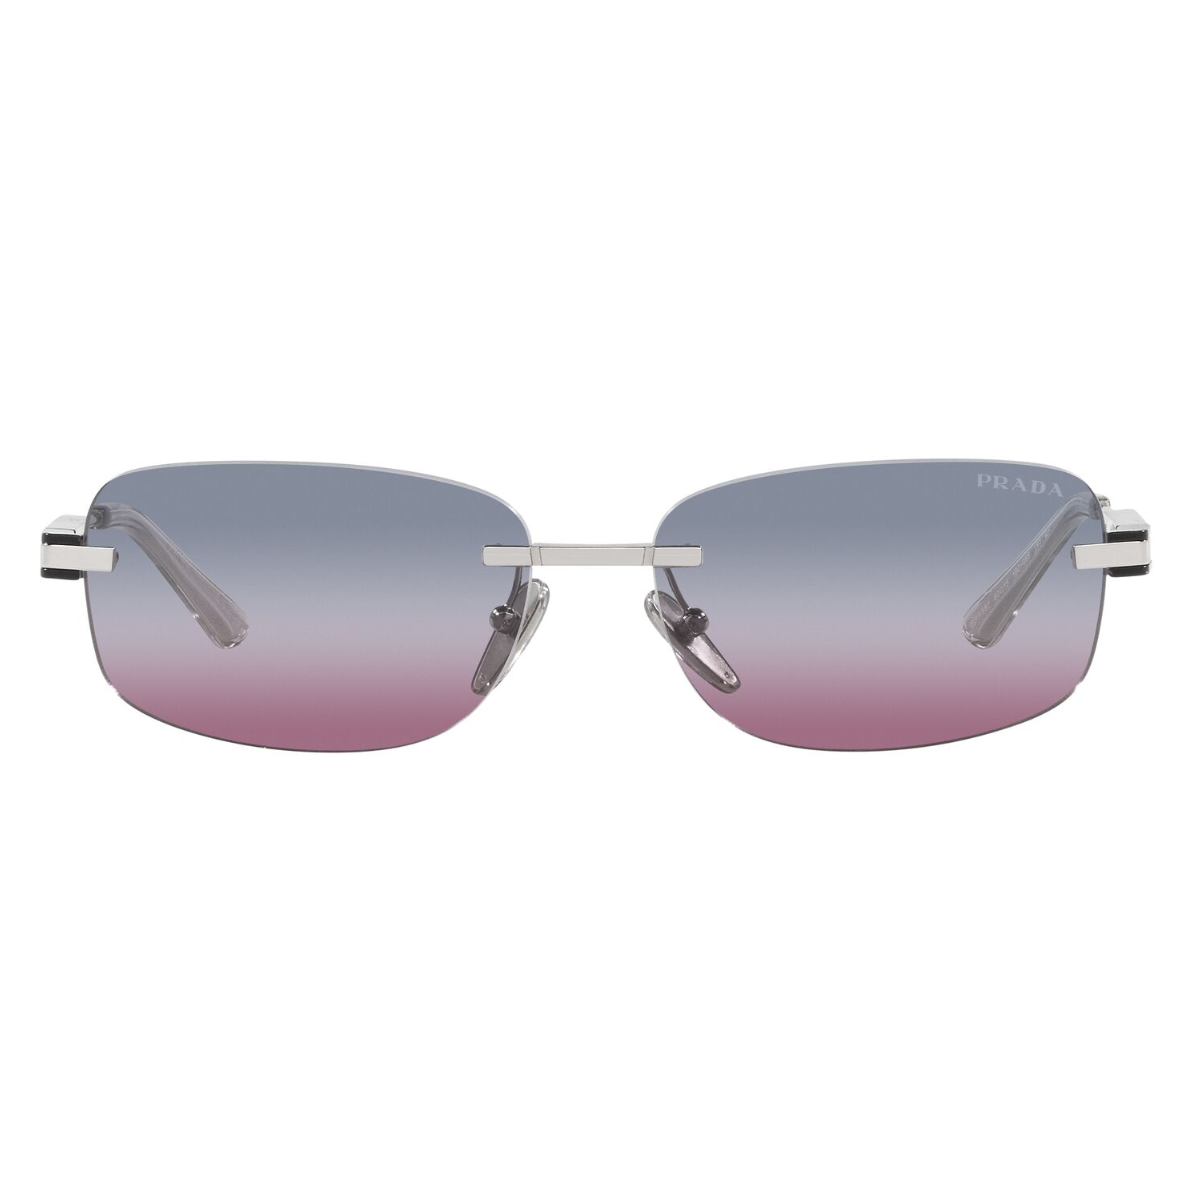 "Find your perfect pair of Prada SPR 68ZS 1BC08B sunglasses at Optorium. With aviator style suitable for both men and women, these Prada shades are the ideal accessory for any outfit."